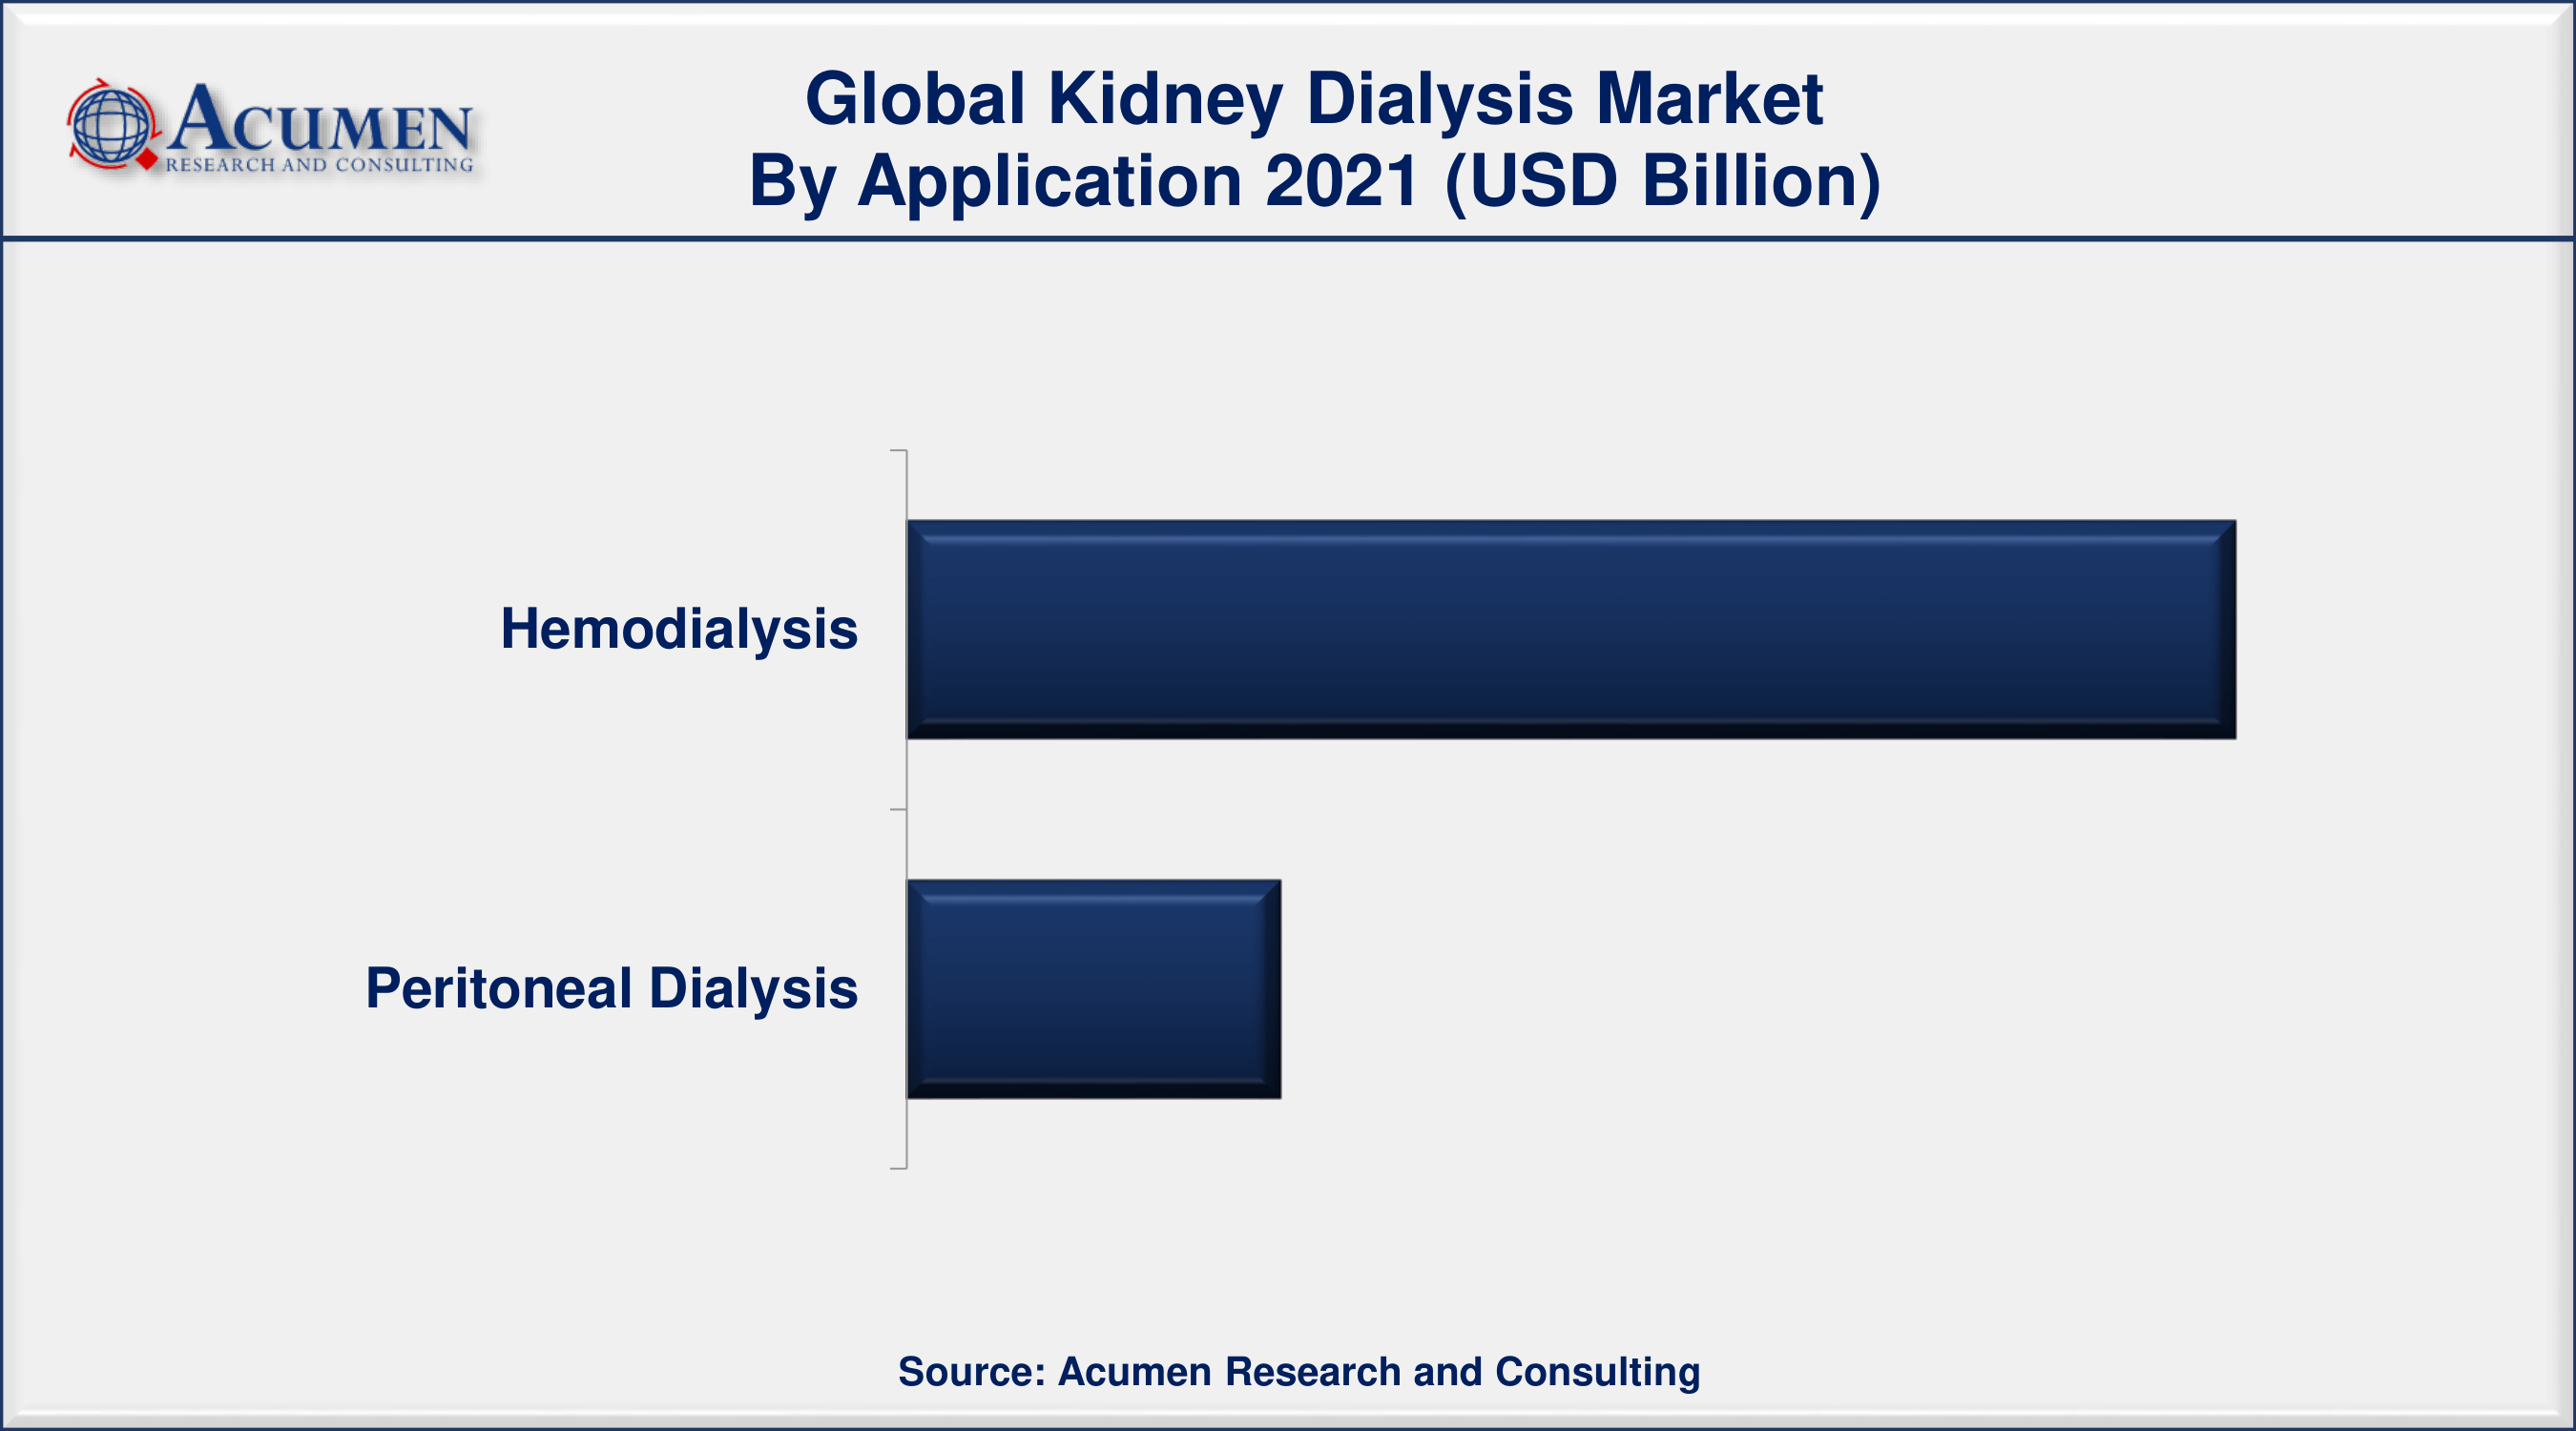 According to the study, chronic kidney disease affects 10% of the world's population